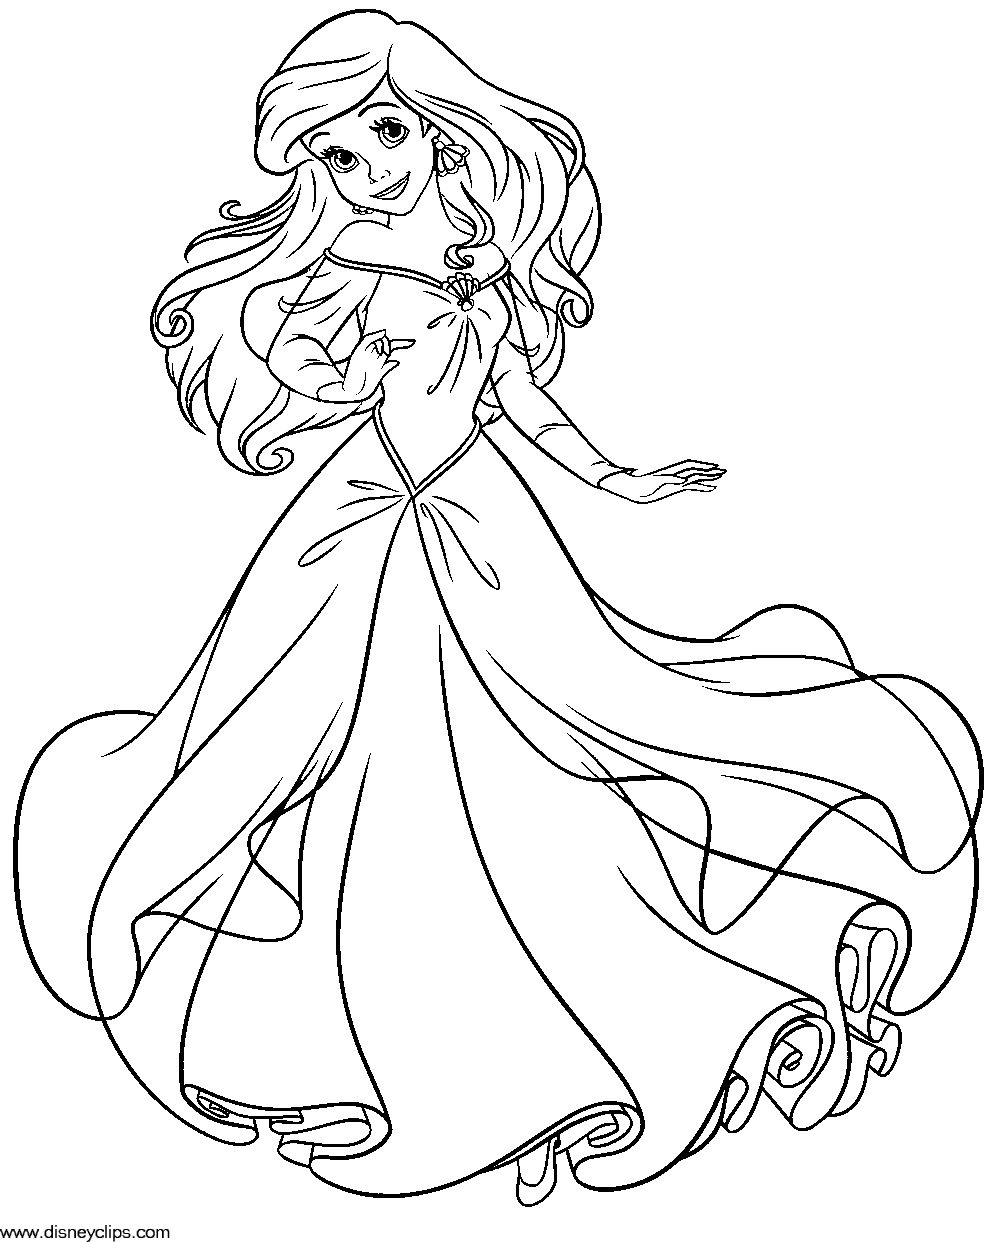 ariel coloring sheet ariel coloring pages to download and print for free coloring ariel sheet 